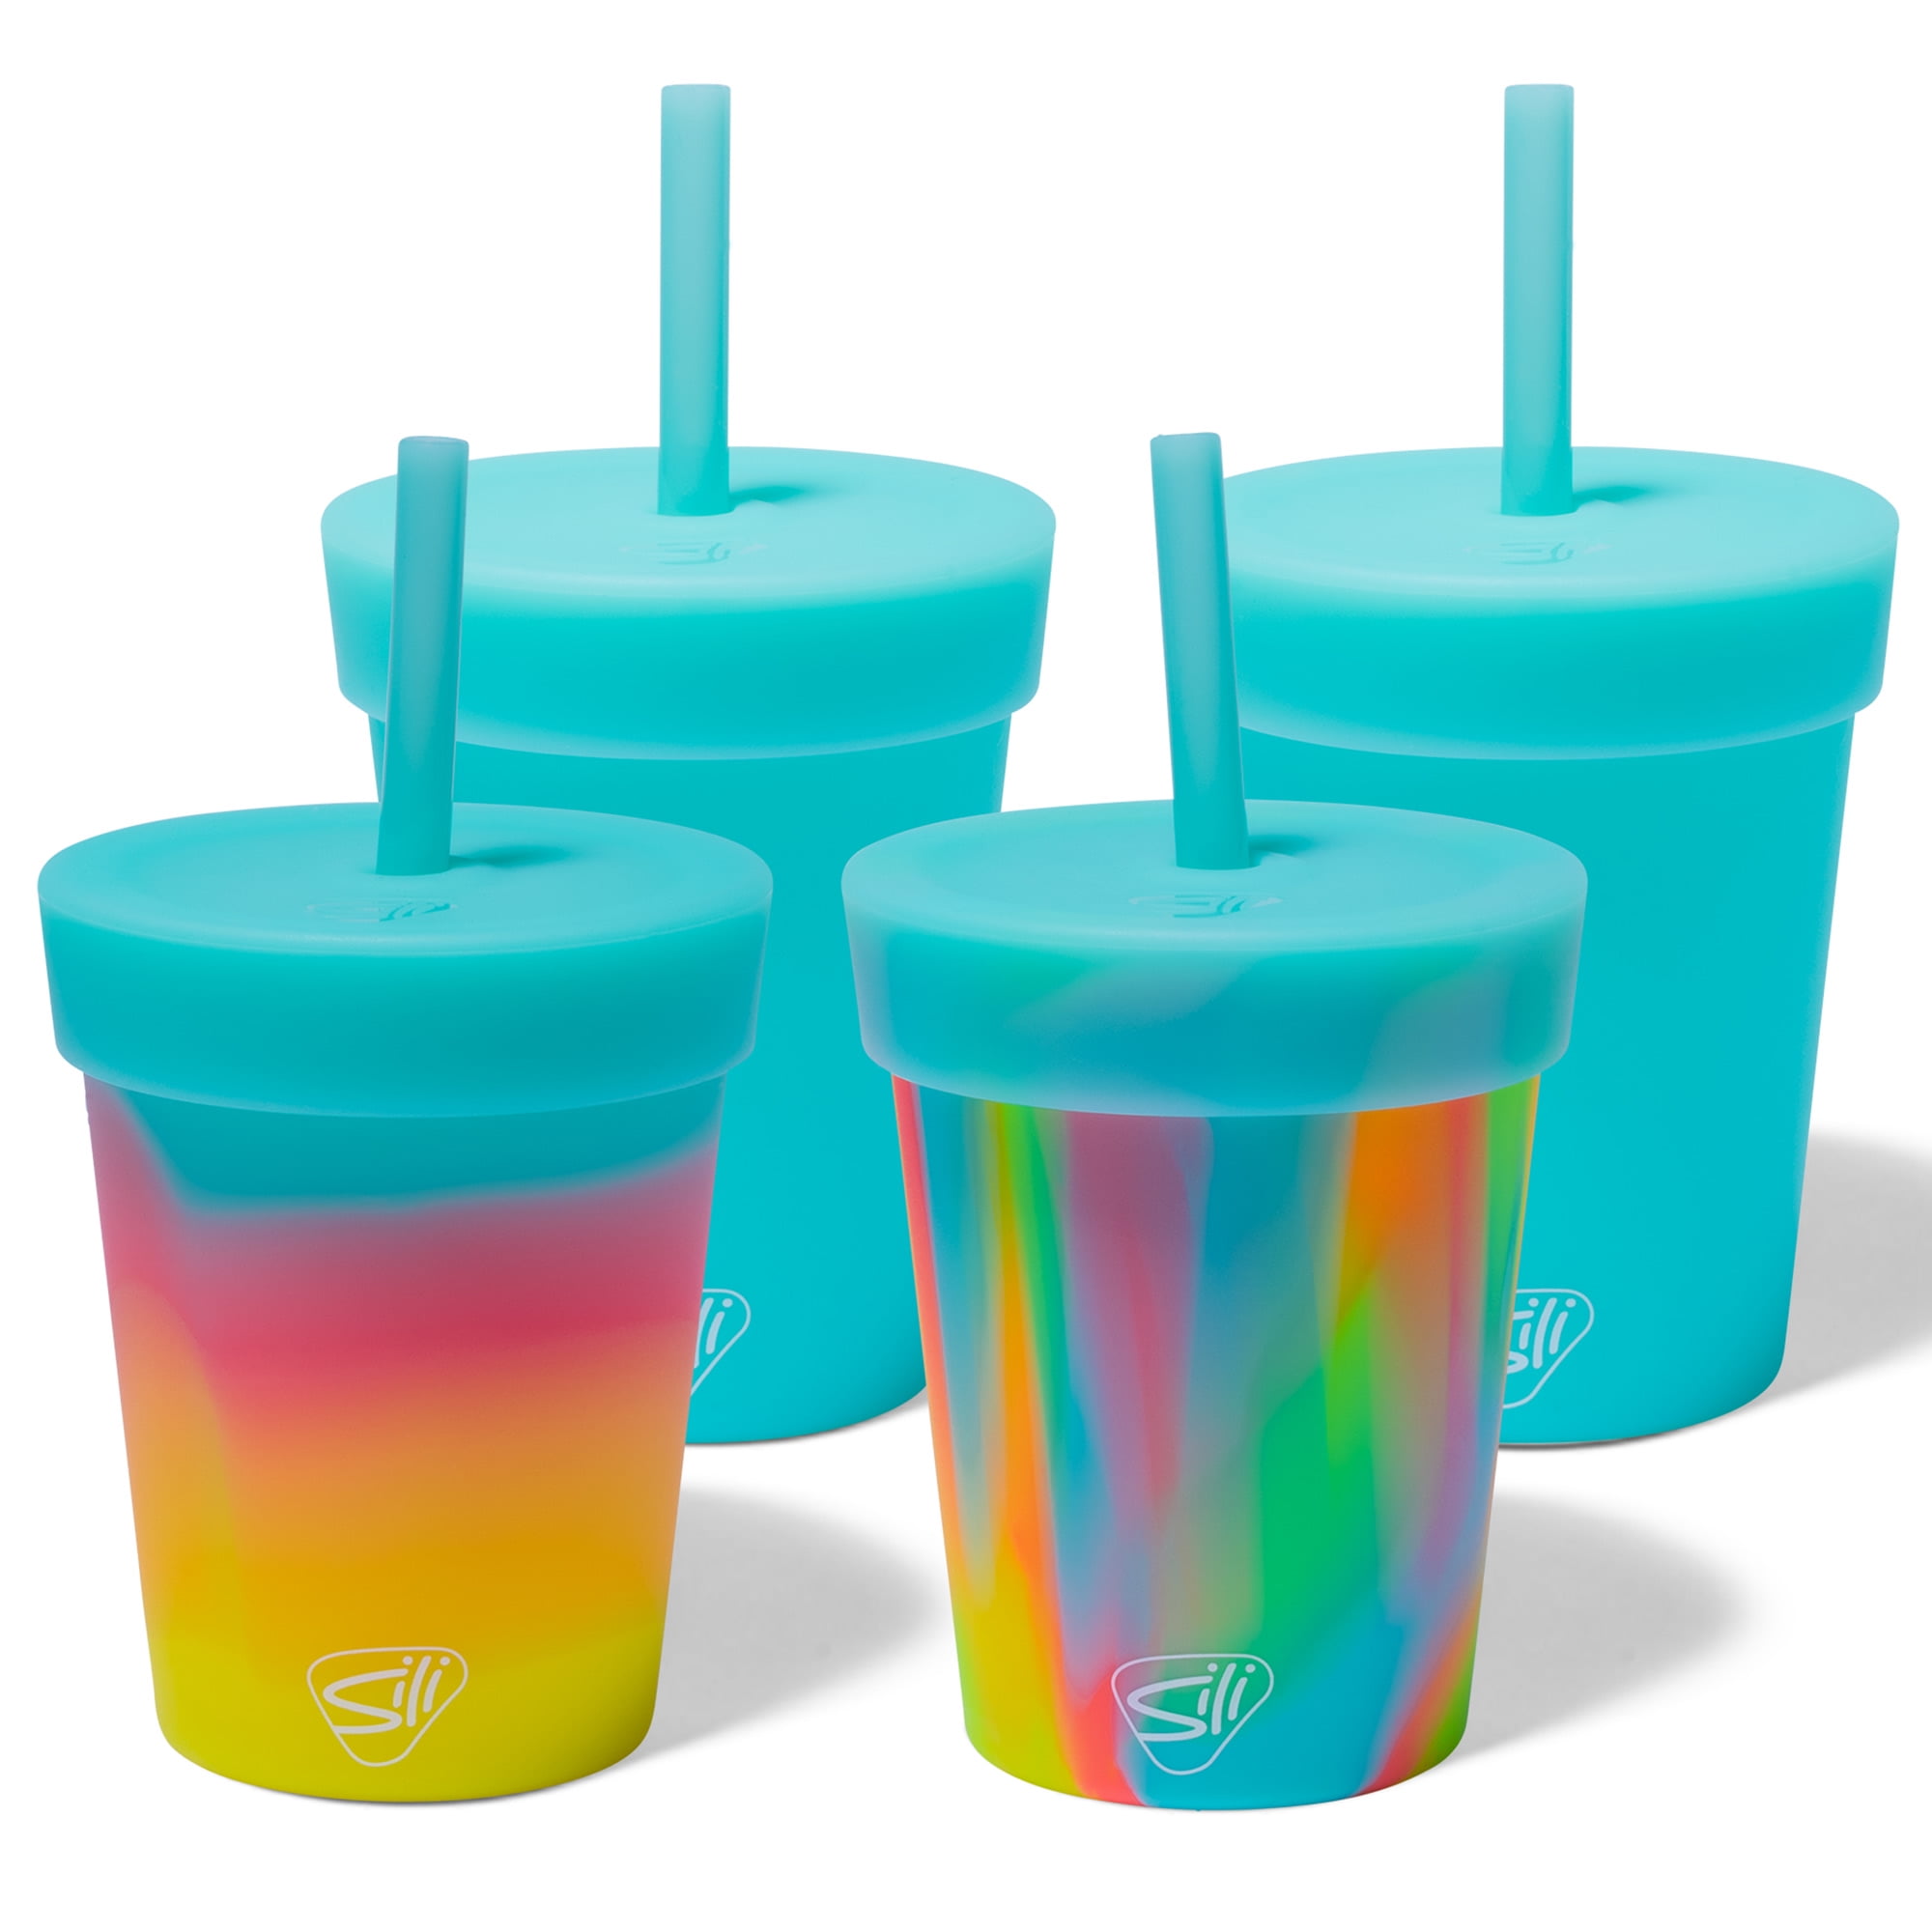  Silipint 22-Ounce Silicone Tumbler Cups with Lids and Straws,  Unbreakable, Reusable, and Versatile Cups for Travel, Hiking, Camping,  Sports, and Outdoors, Arctic Sky & Hippy Hop, Pack of 2 : Health